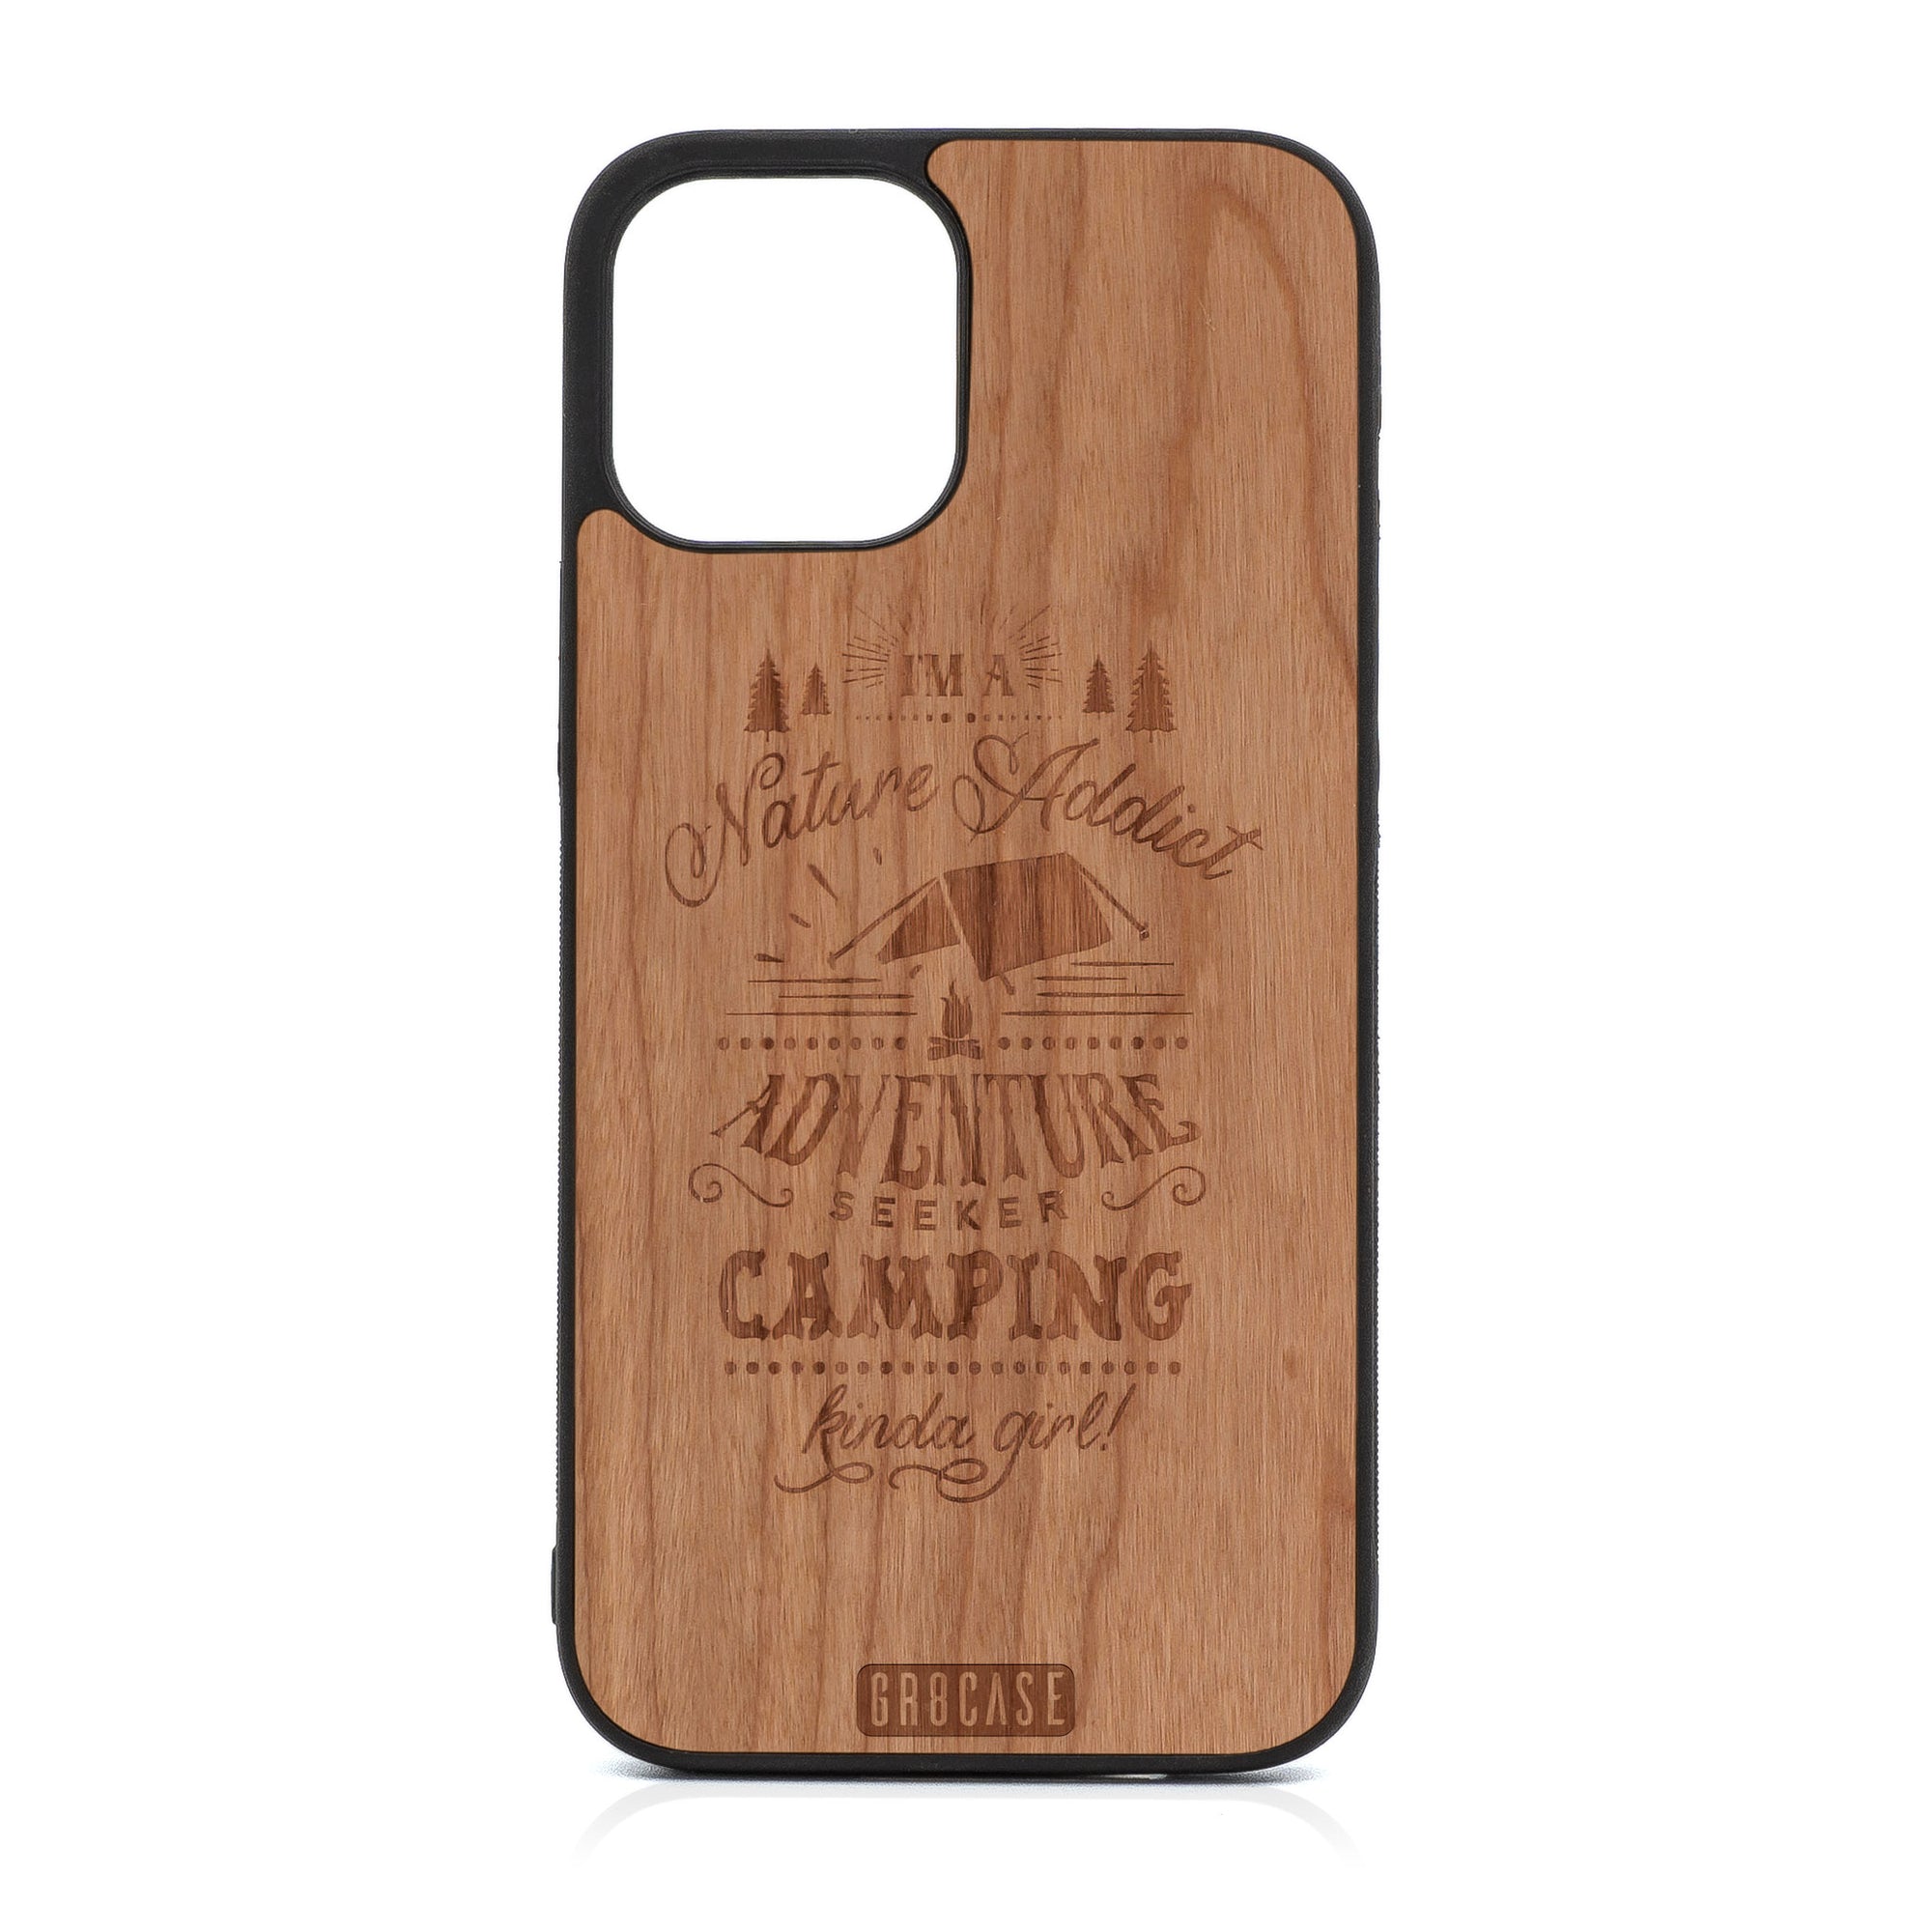 I'm A Nature Addict Adventure Seeker Camping Kinda Girl Design Wood Case For iPhone 12 Pro Max